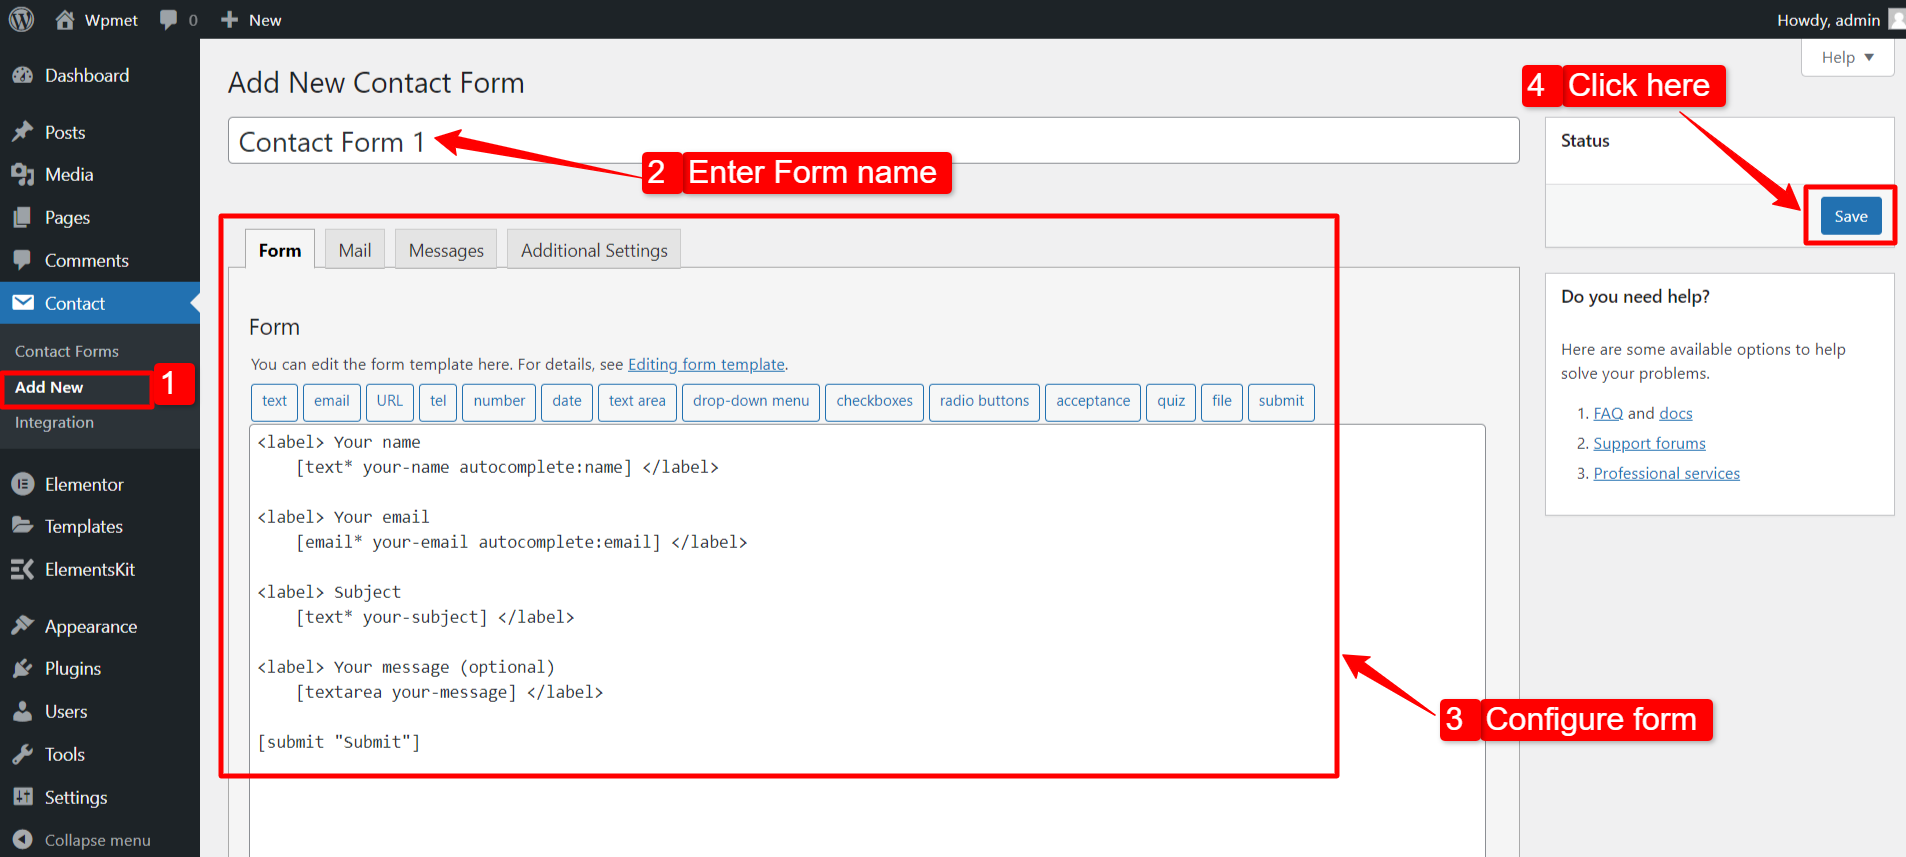 Add New Contact Form 7 on WordPress